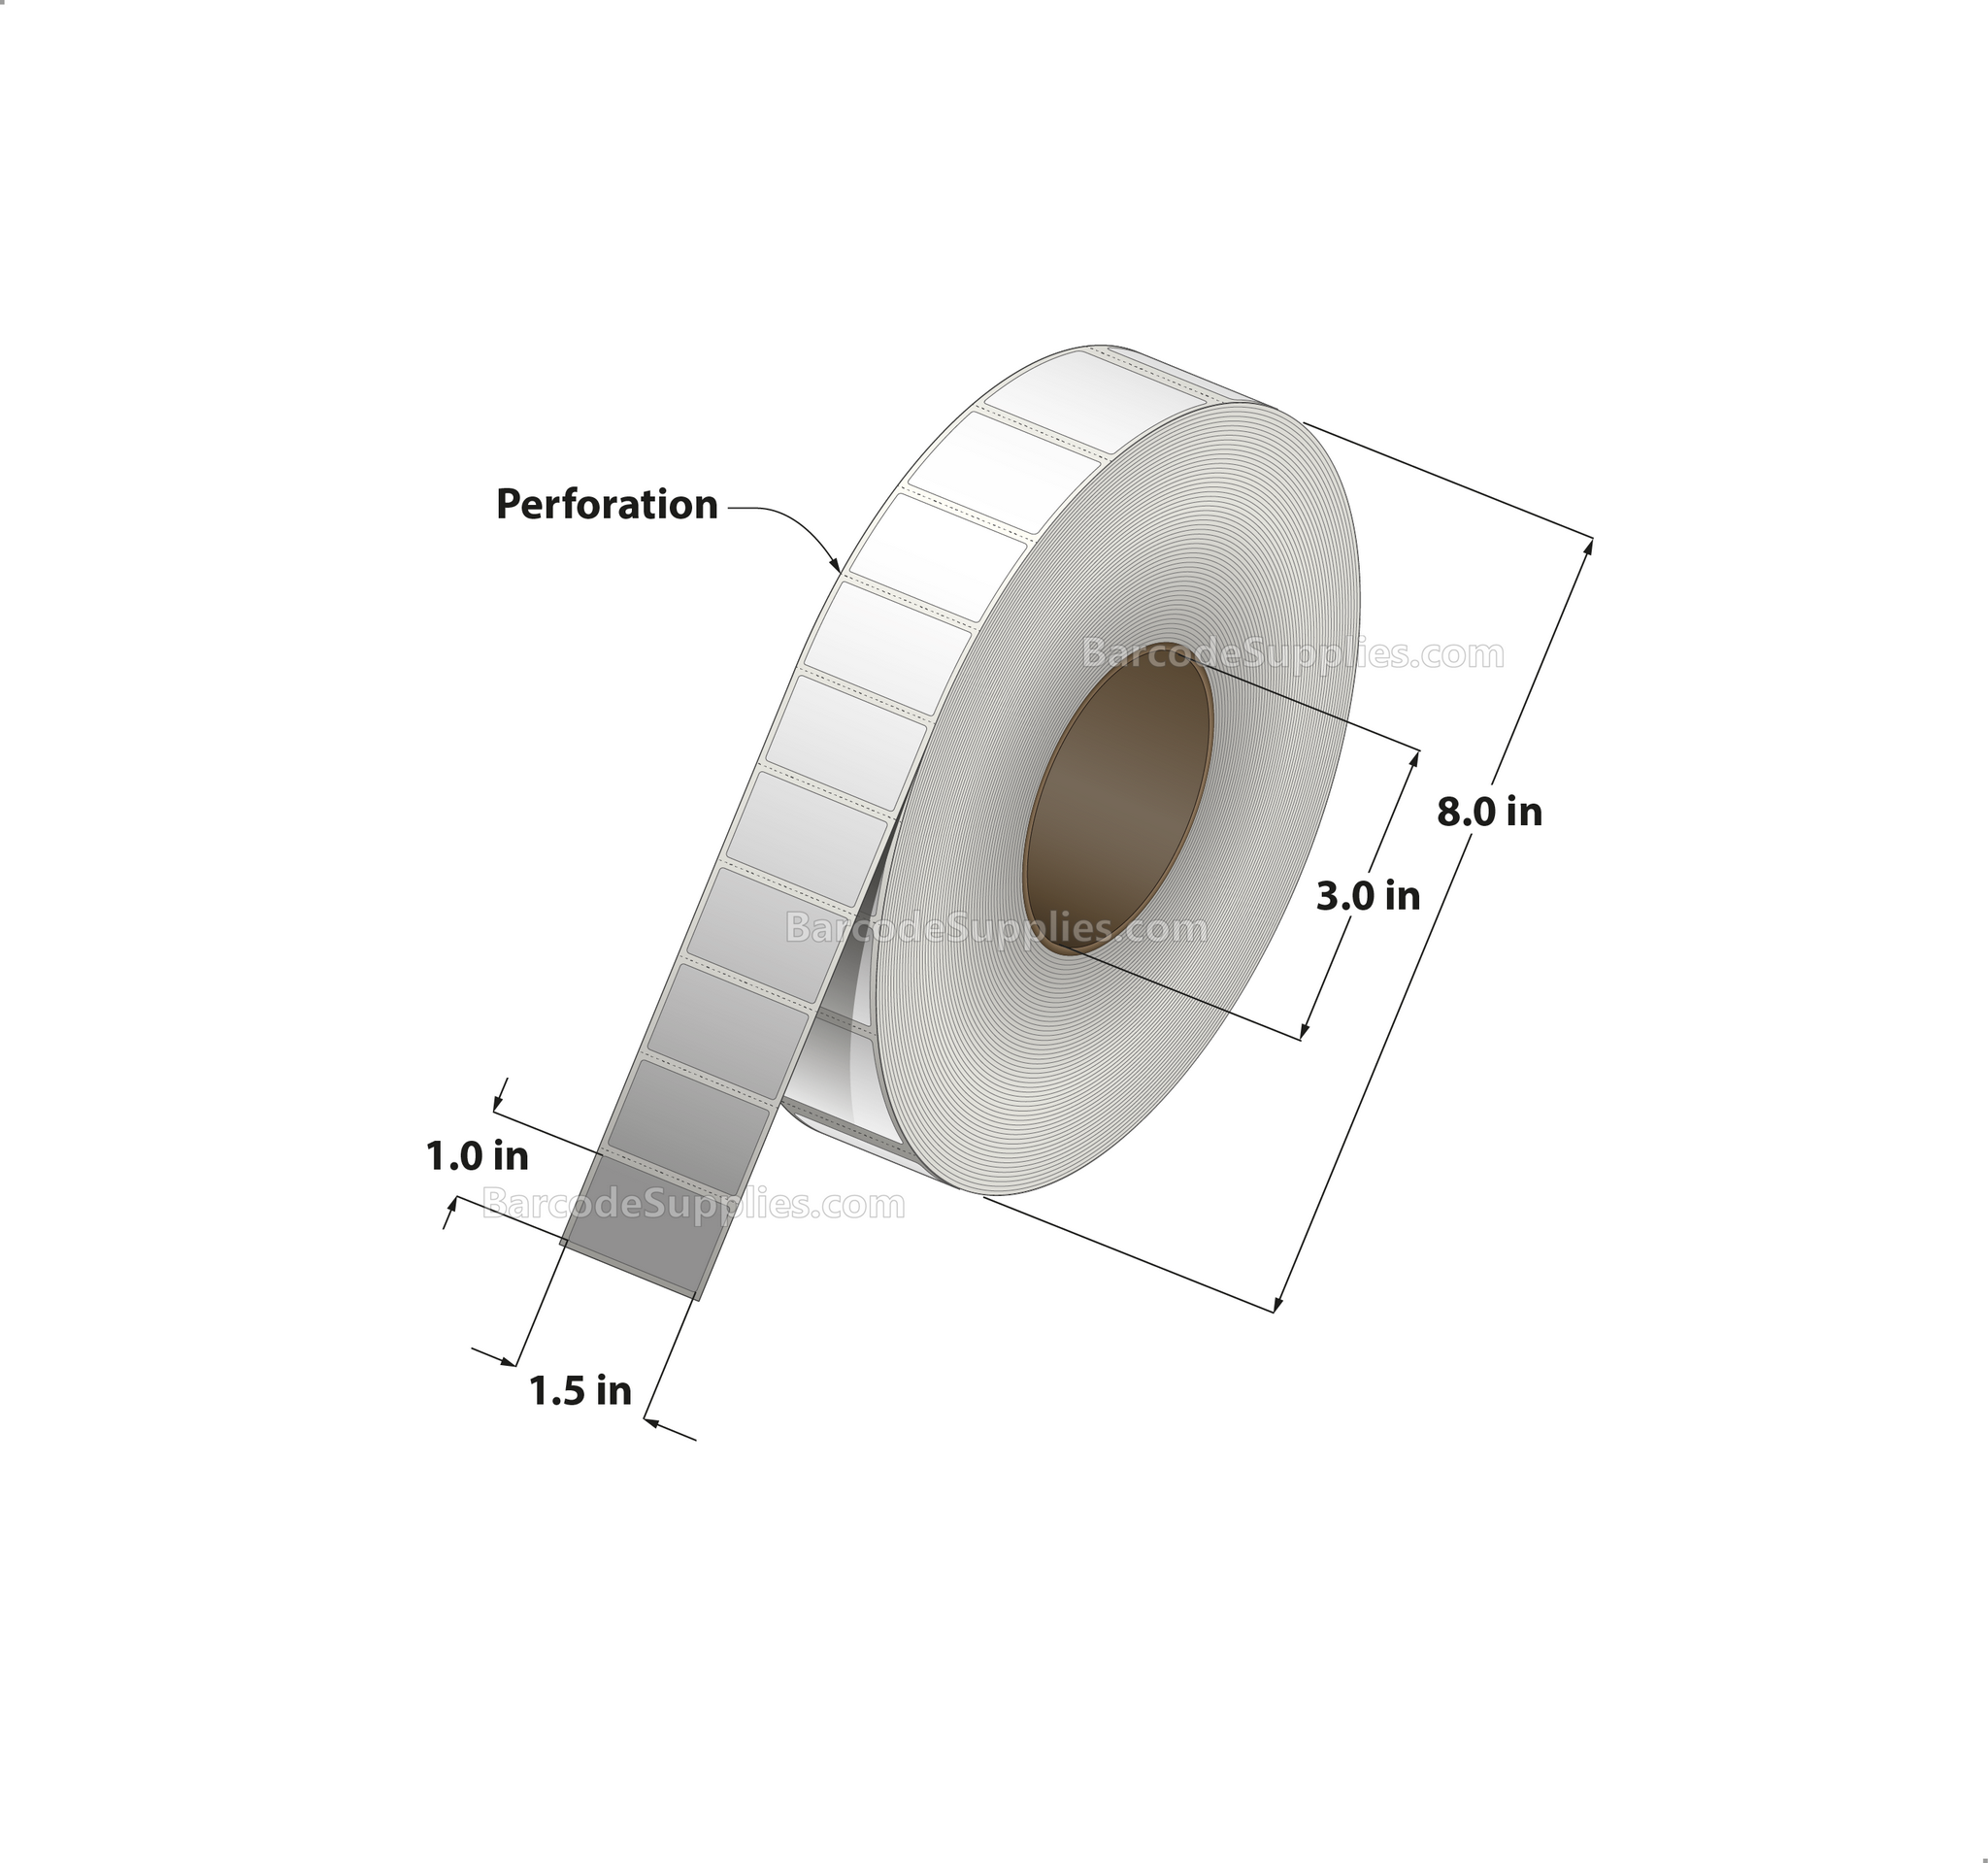 1.5 x 1 Direct Thermal White Labels With Acrylic Adhesive - Perforated - 5500 Labels Per Roll - Carton Of 8 Rolls - 44000 Labels Total - MPN: RD-15-1-5500-3 - BarcodeSource, Inc.